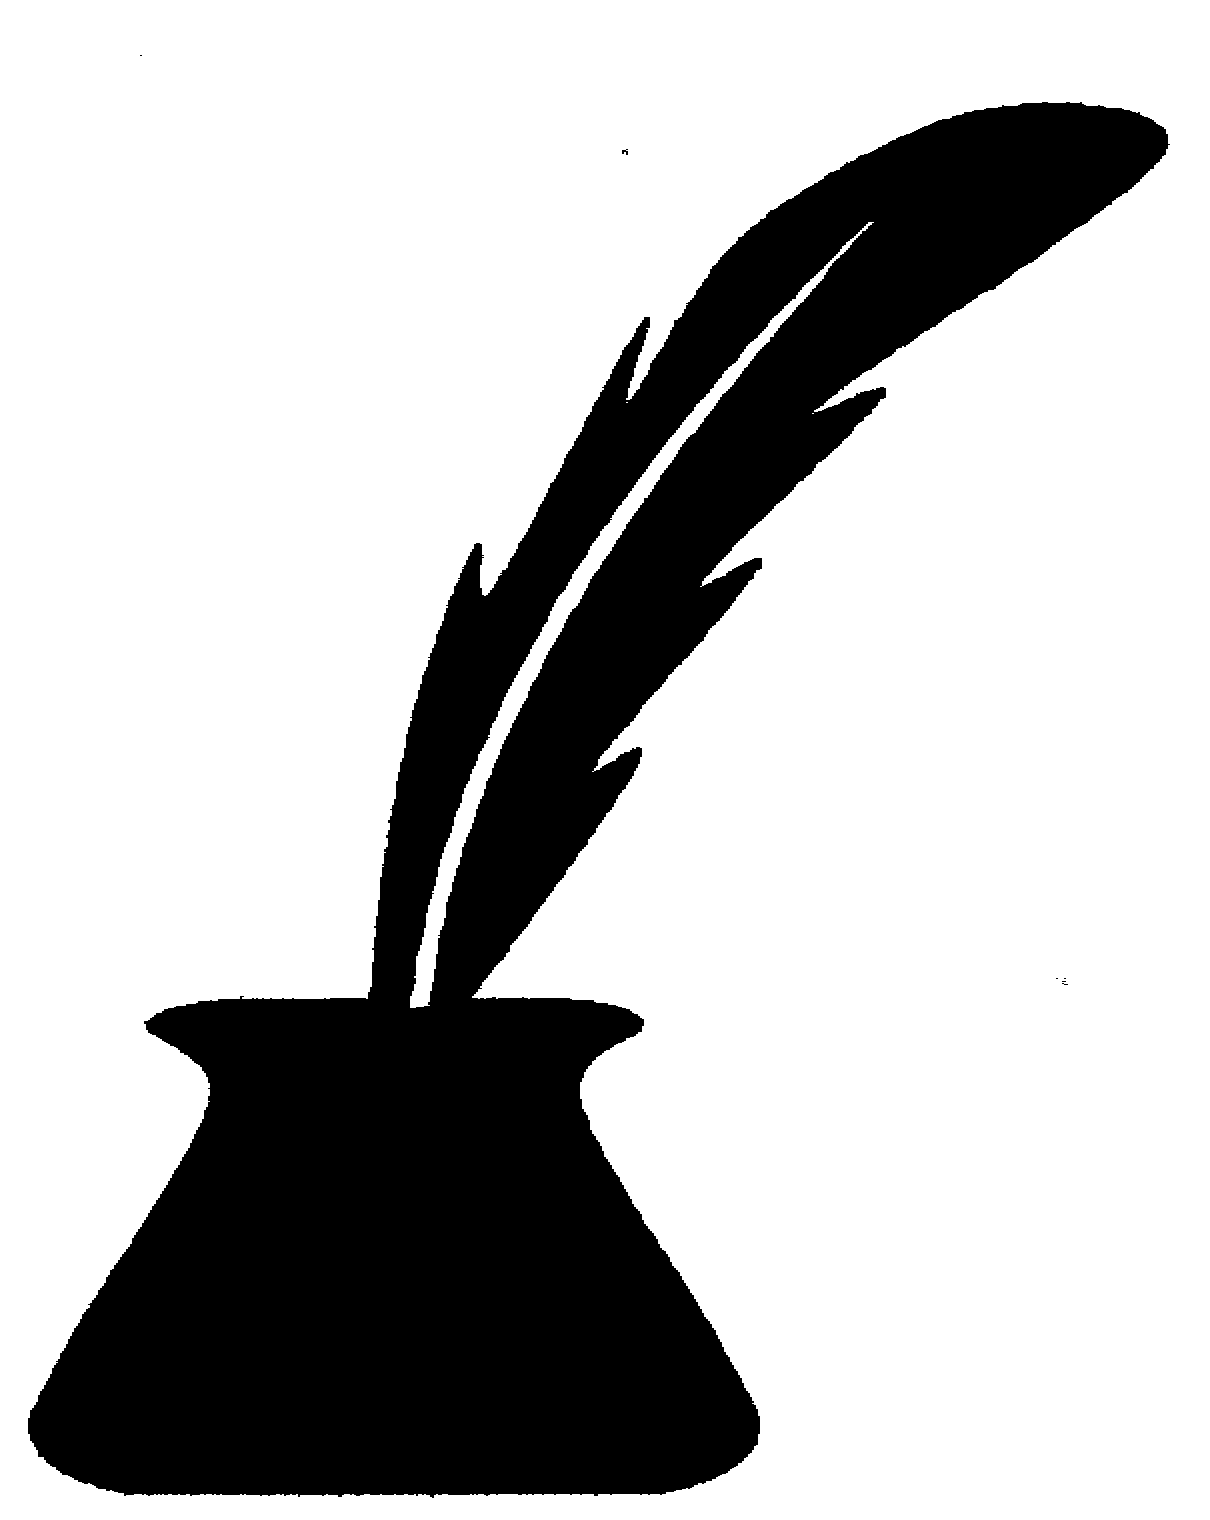 Quill Pen Clipart Black And White Photos   Good Pix Gallery